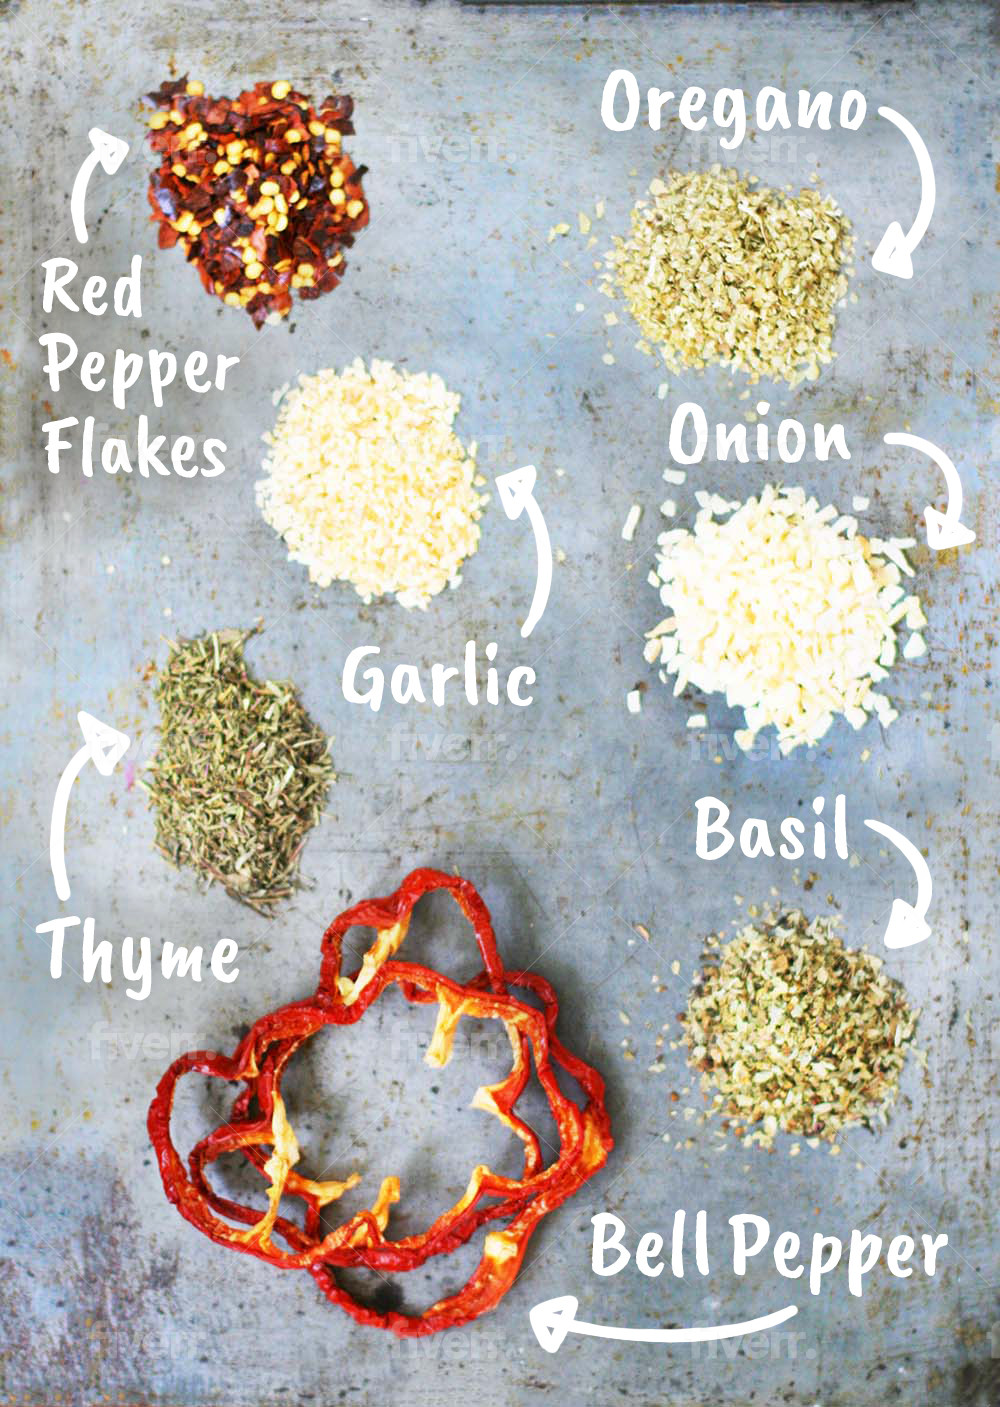 Spice for pizza seasoning mix: Simple, affordable - makes a great gift from the kitchen!